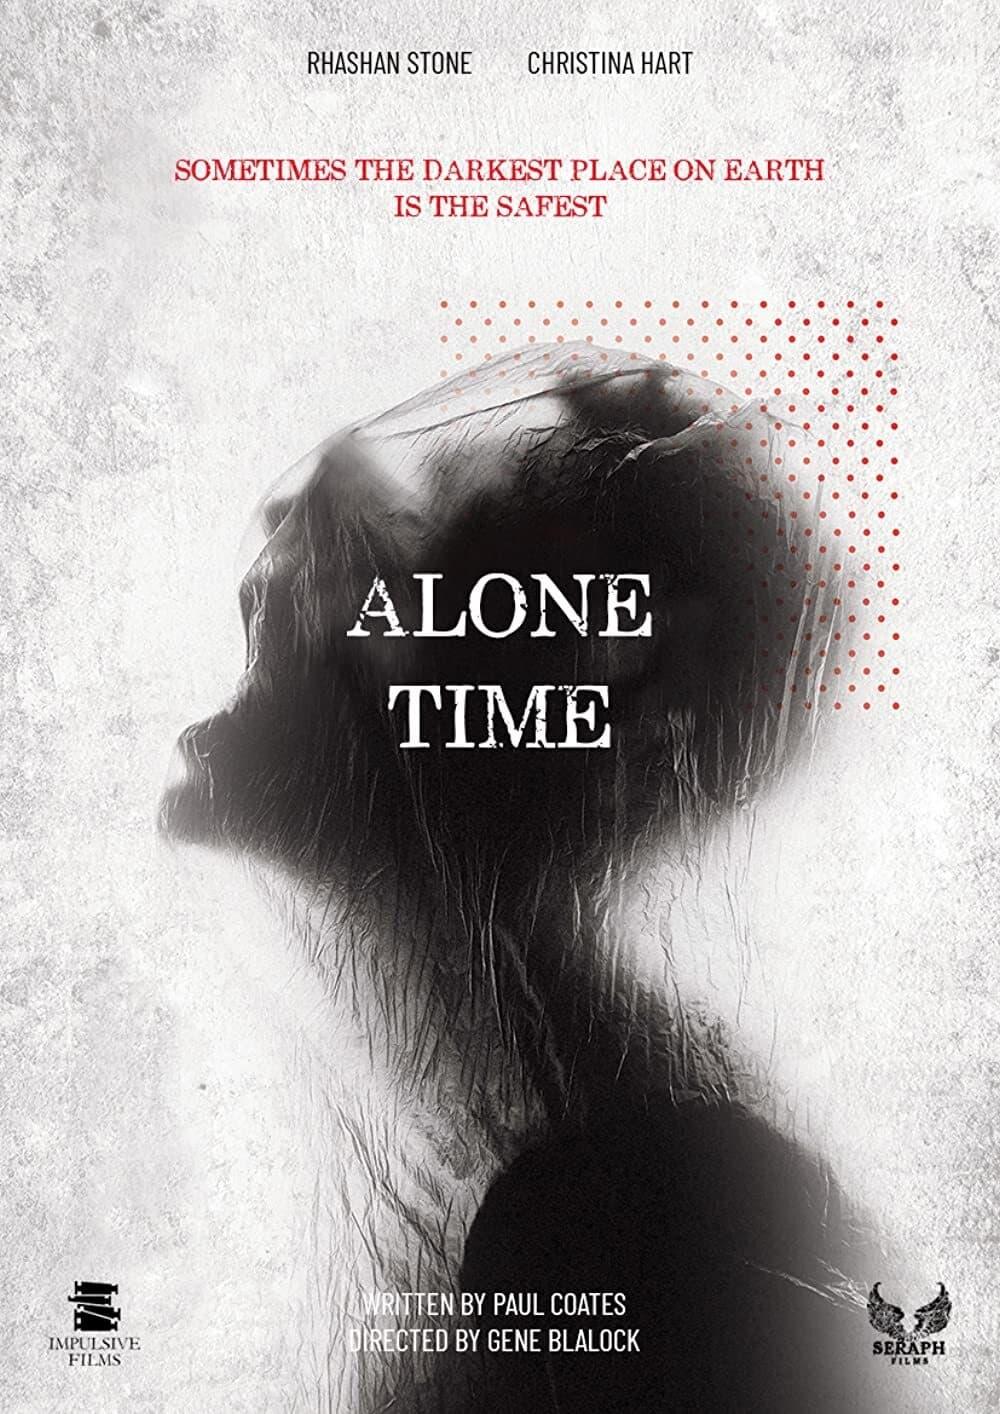 Alone Time poster